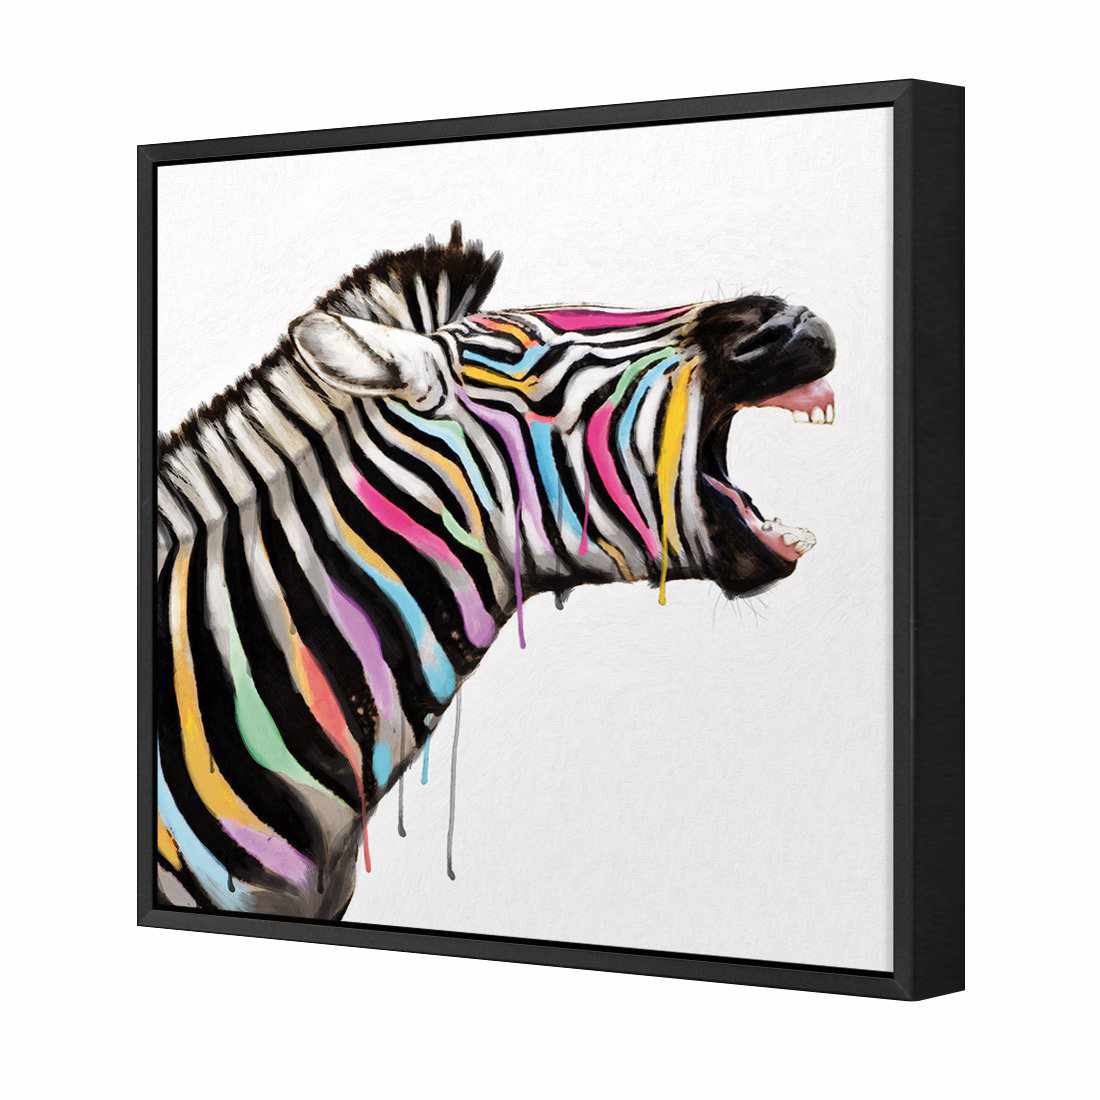 Laughing Stock Canvas Art-Canvas-Wall Art Designs-30x30cm-Canvas - Black Frame-Wall Art Designs